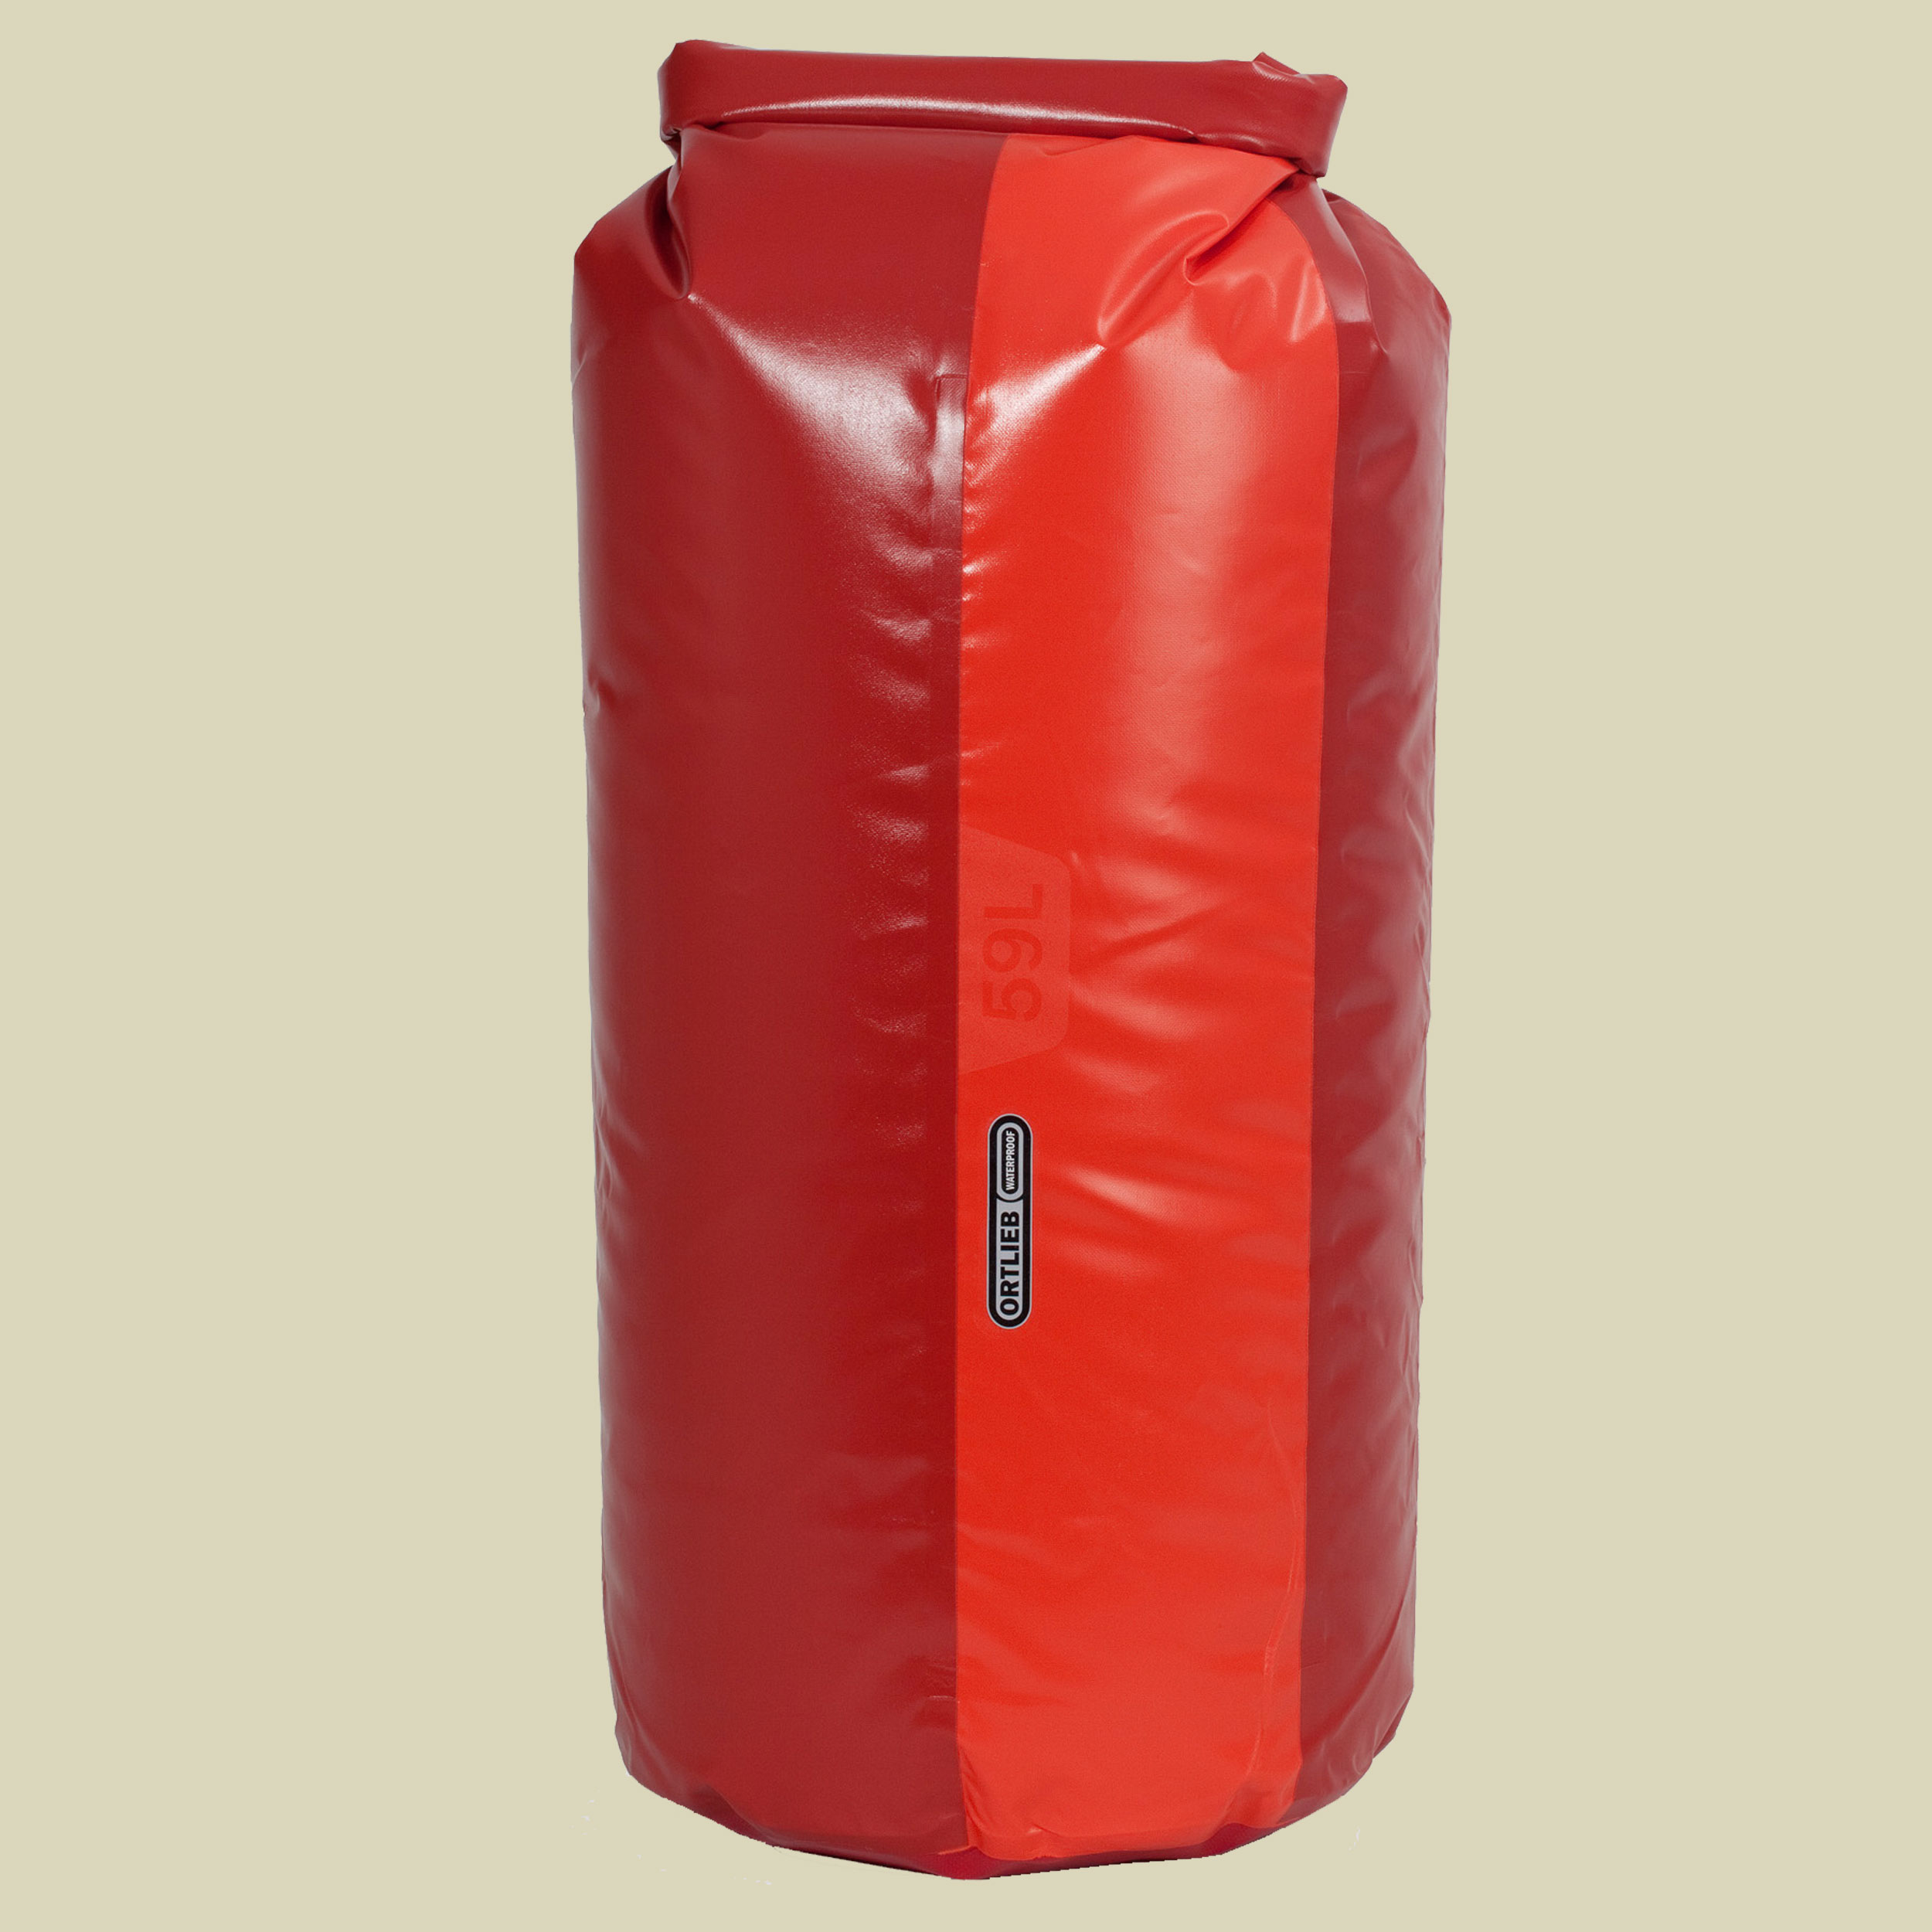 Dry-Bag PD 350 Volumen in Liter 22 Farbe cranberry-signalrot